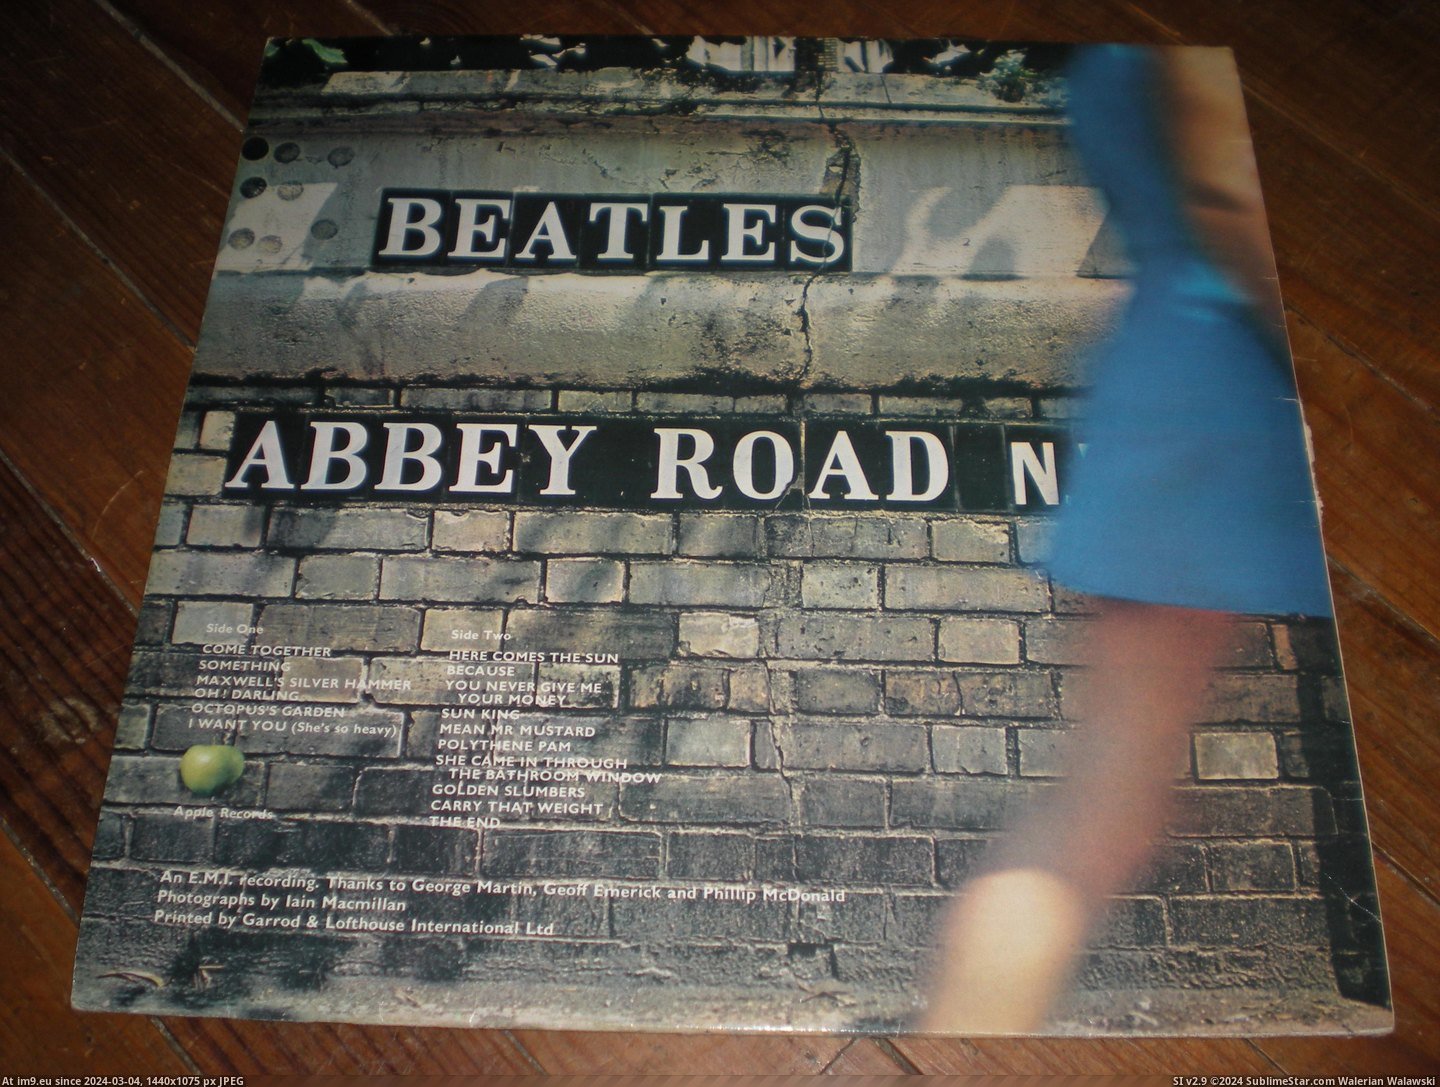  #Abbey  Abbey Rd 16-01-14 6 Pic. (Image of album new 1))